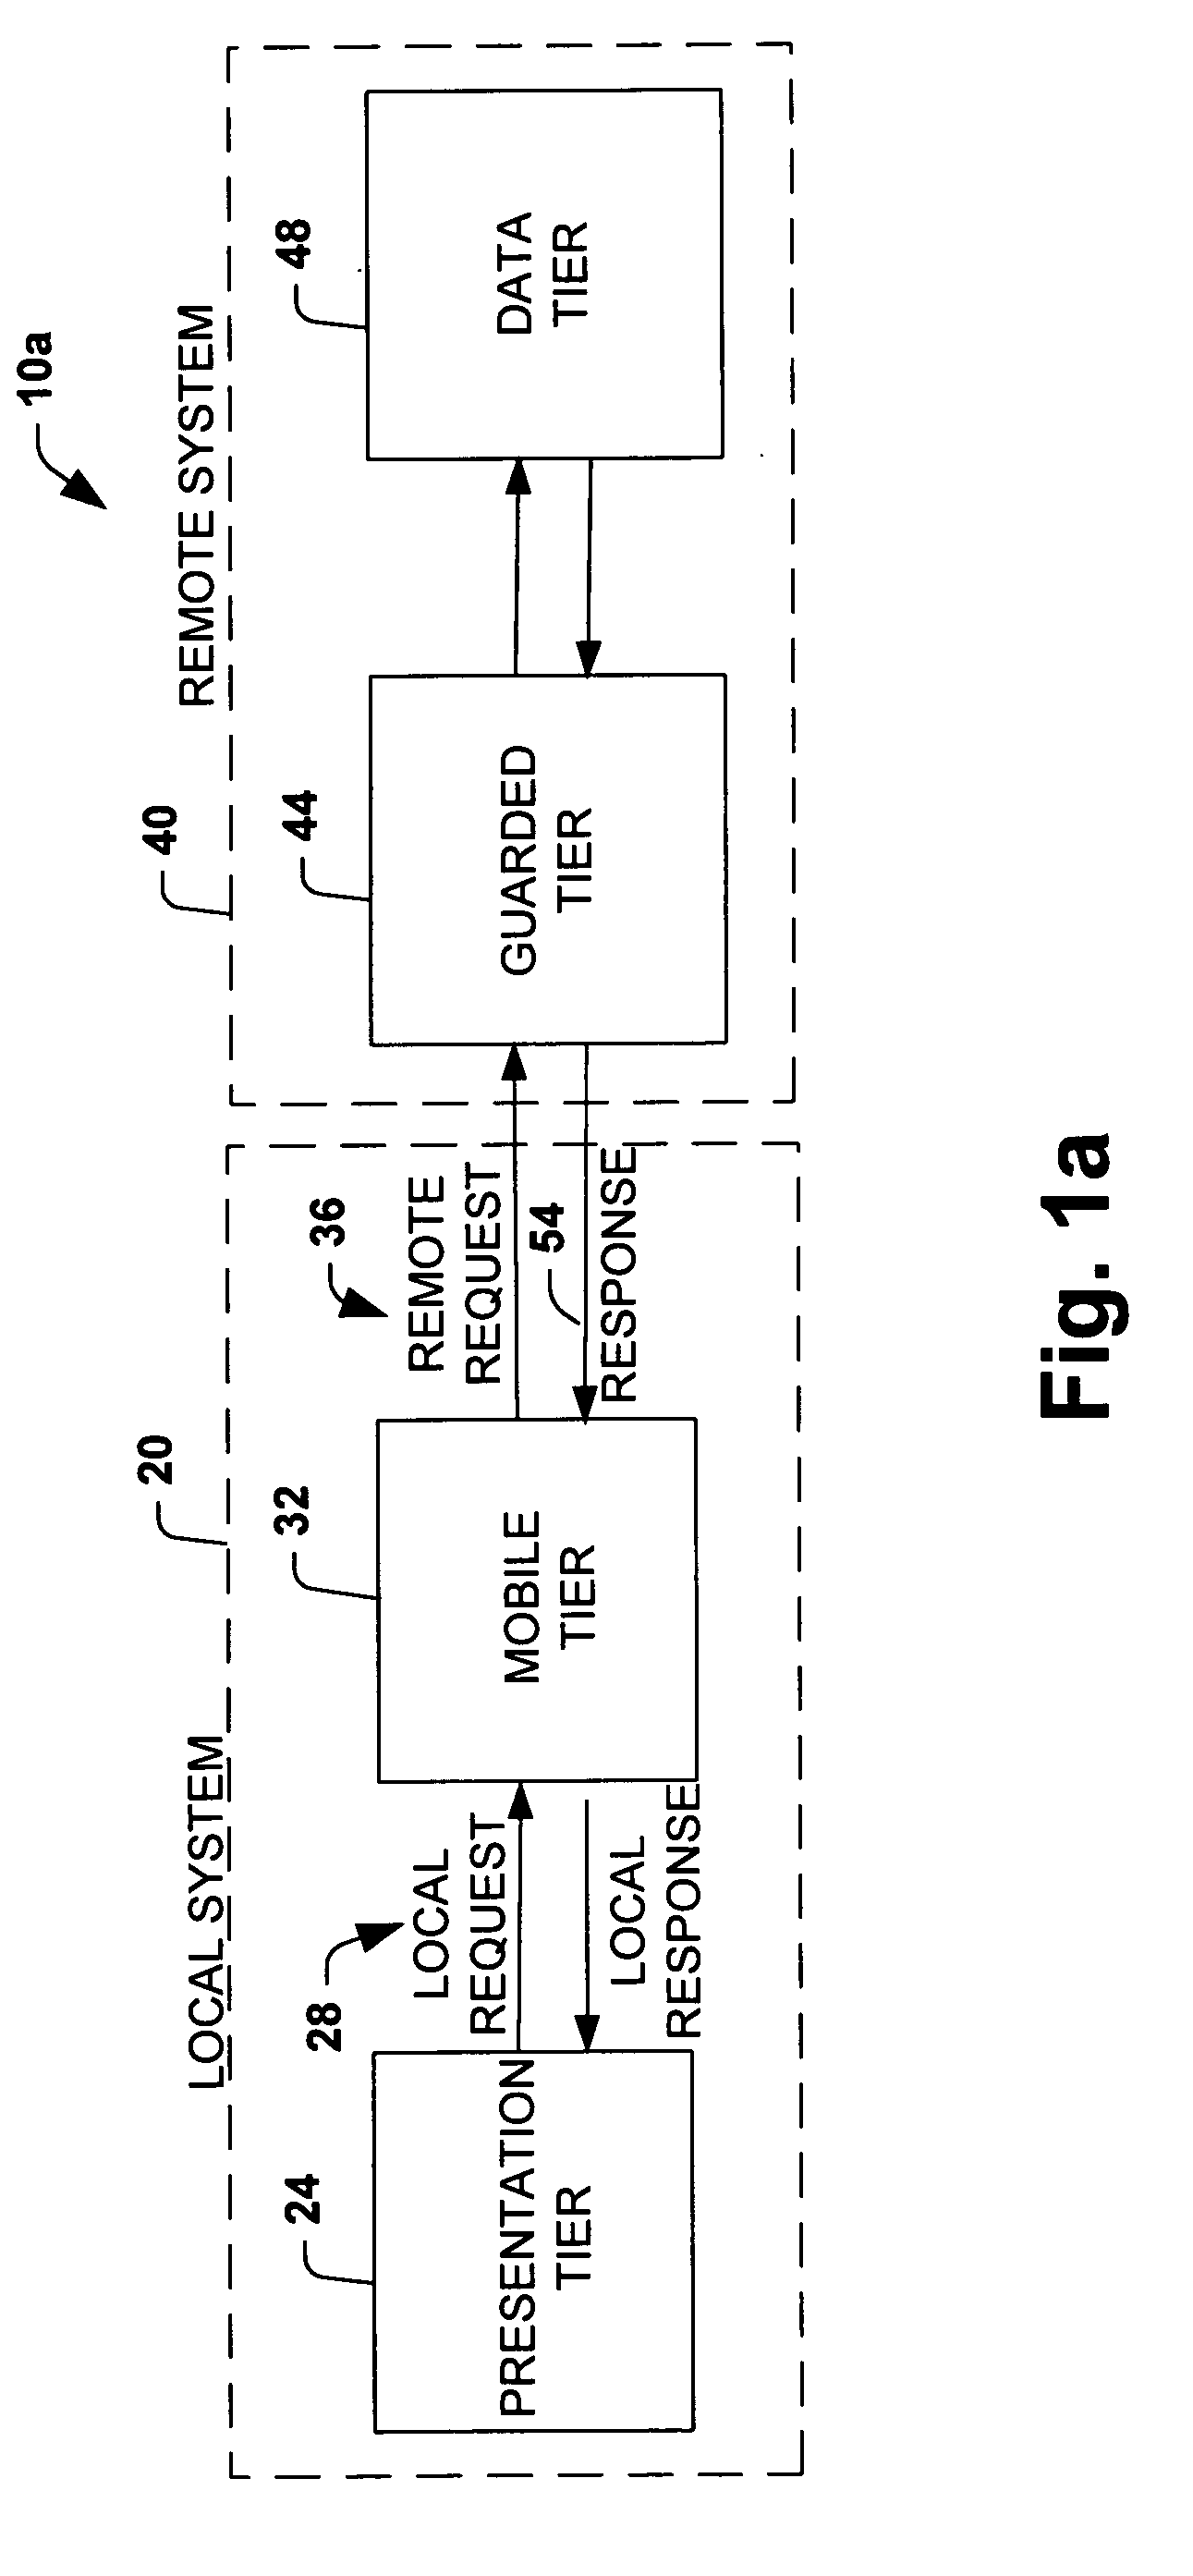 System and method providing multi-tier applications architecture